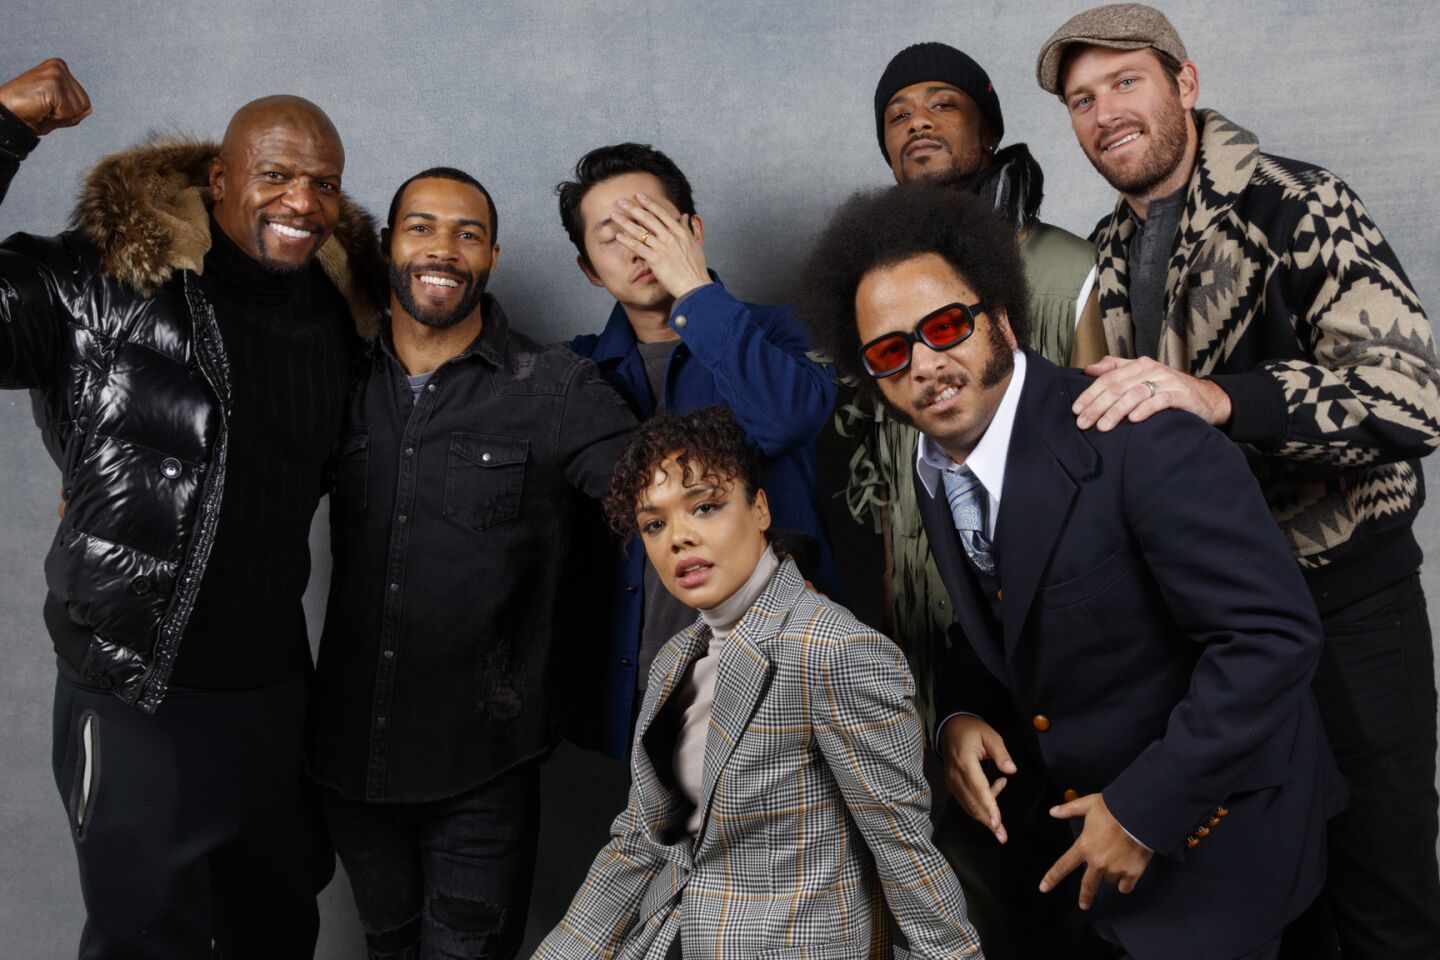 From left, actors Terry Crews, Omari Hardwick, Steven Yeun, Tessa Thompson, director Boots Riley, and actors LaKeith Stanfield and Armie Hammer, from the film "Sorry to Bother You," photographed in the L.A. Times studio during the Sundance Film Festival in Park City, Utah, Jan. 20, 2018.